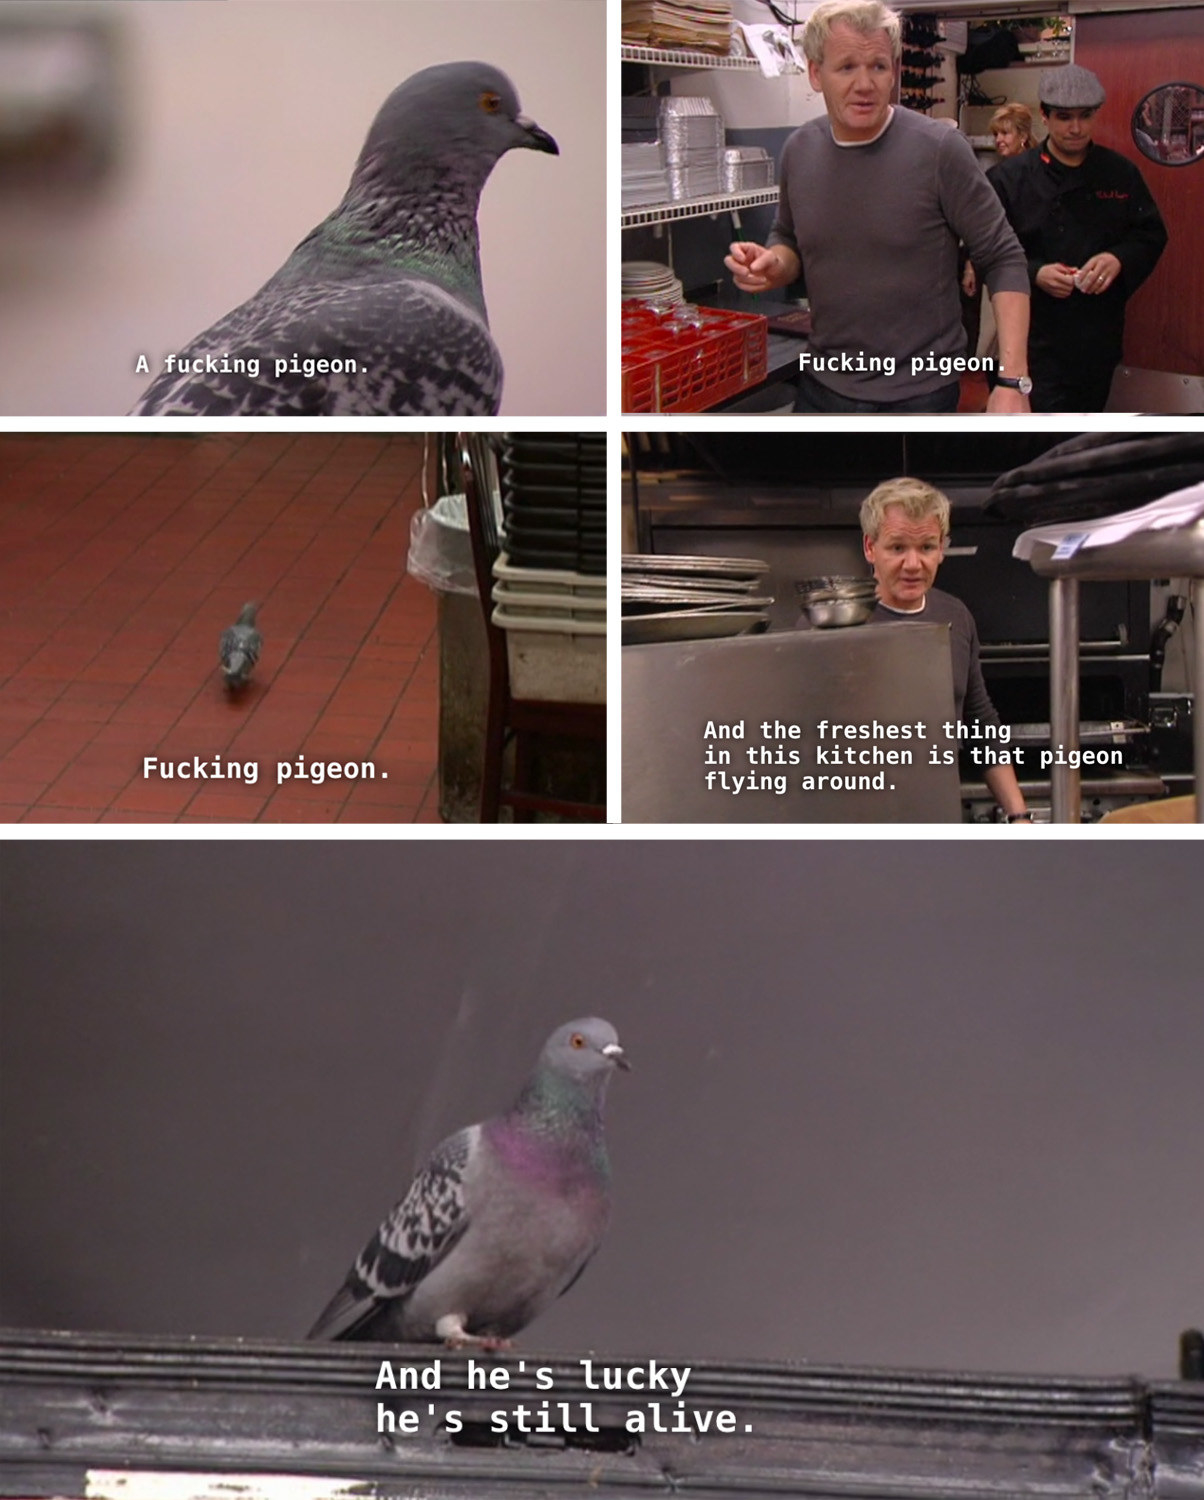 pigeon inside a kitchen and Gordon says it&#x27;s the freshest thing in there